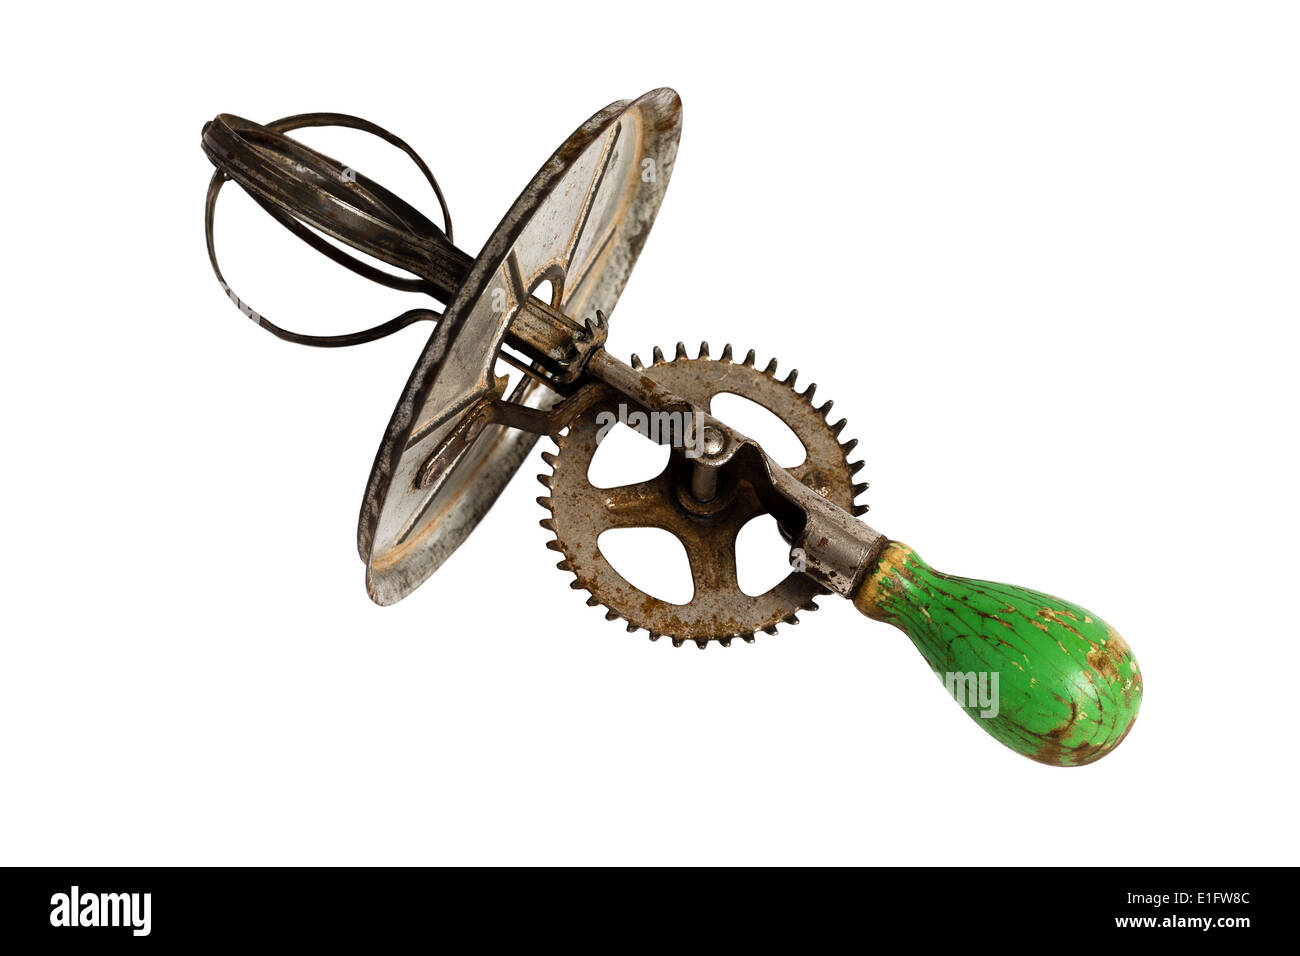 https://c8.alamy.com/comp/E1FW8C/antique-egg-beater-with-a-green-wooden-handle-on-a-solid-white-background-E1FW8C.jpg